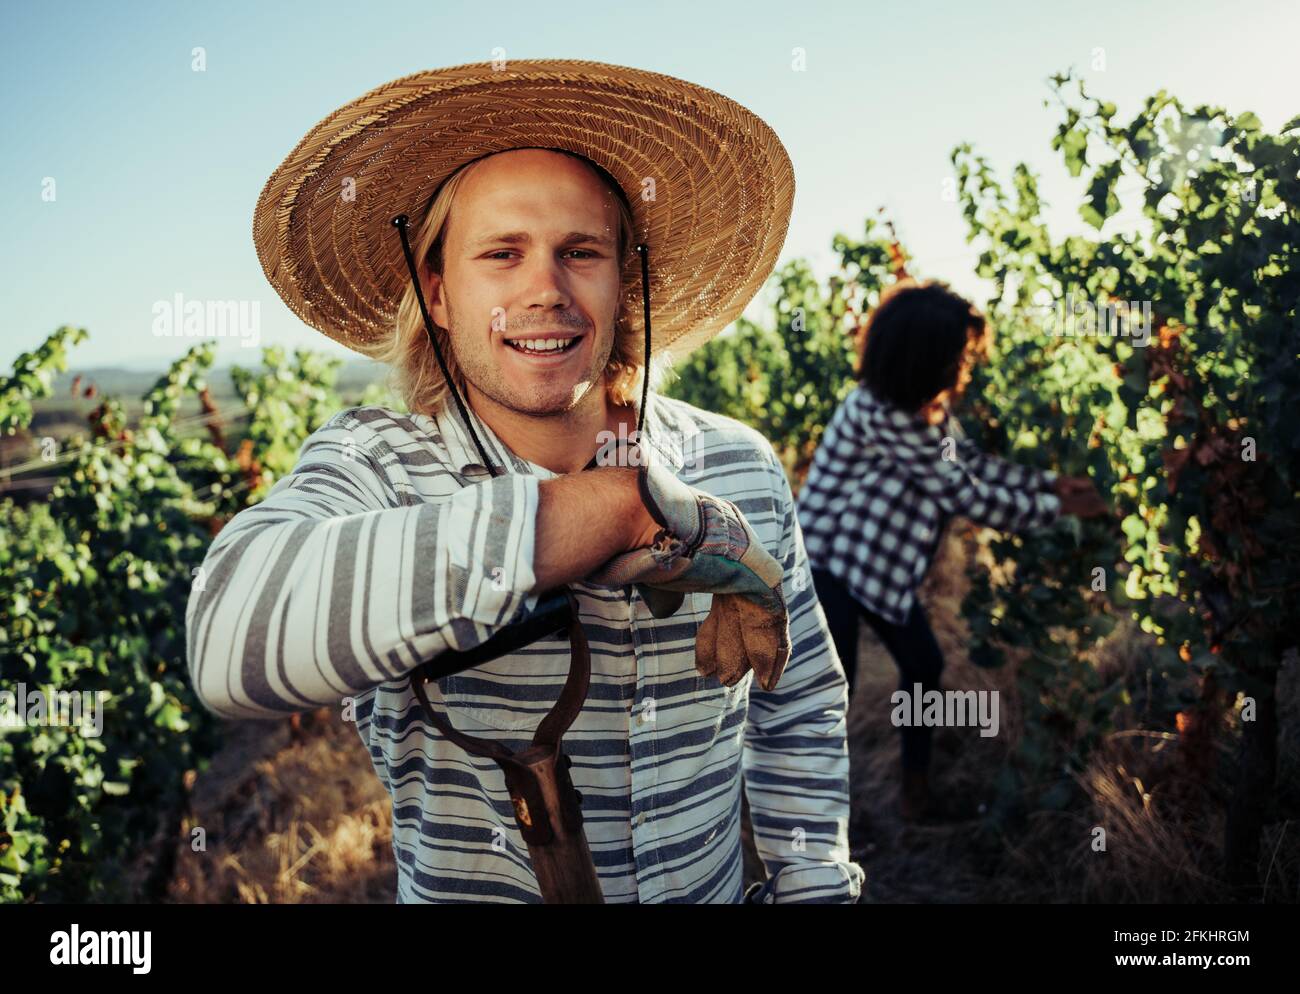 Caucasian blonde male farmer smiling in vineyards wearing straw hat leaning on pitch fork Stock Photo